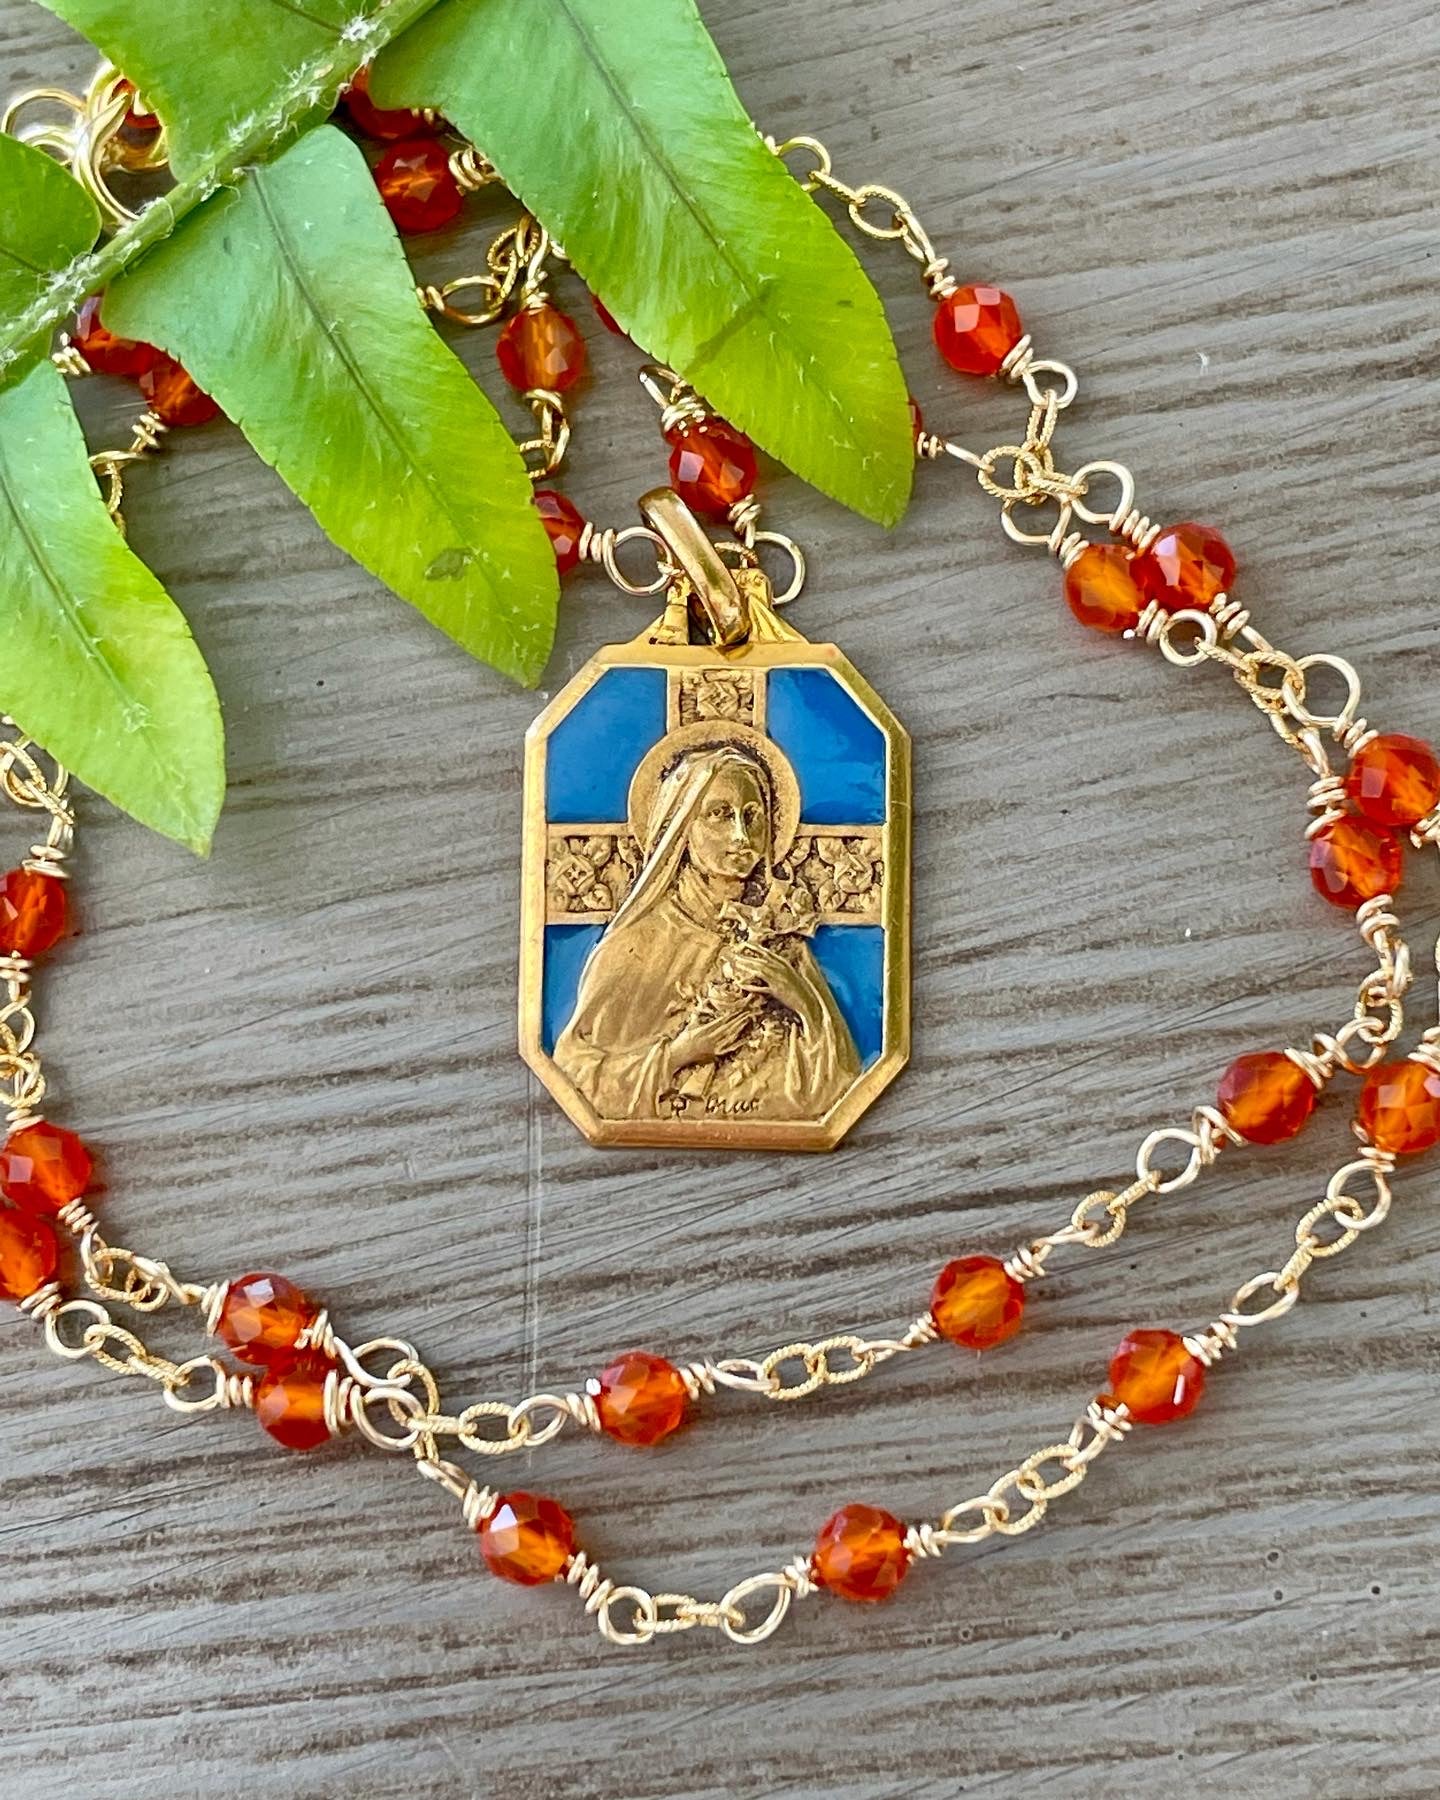 St. Theresa Vintage French Medal